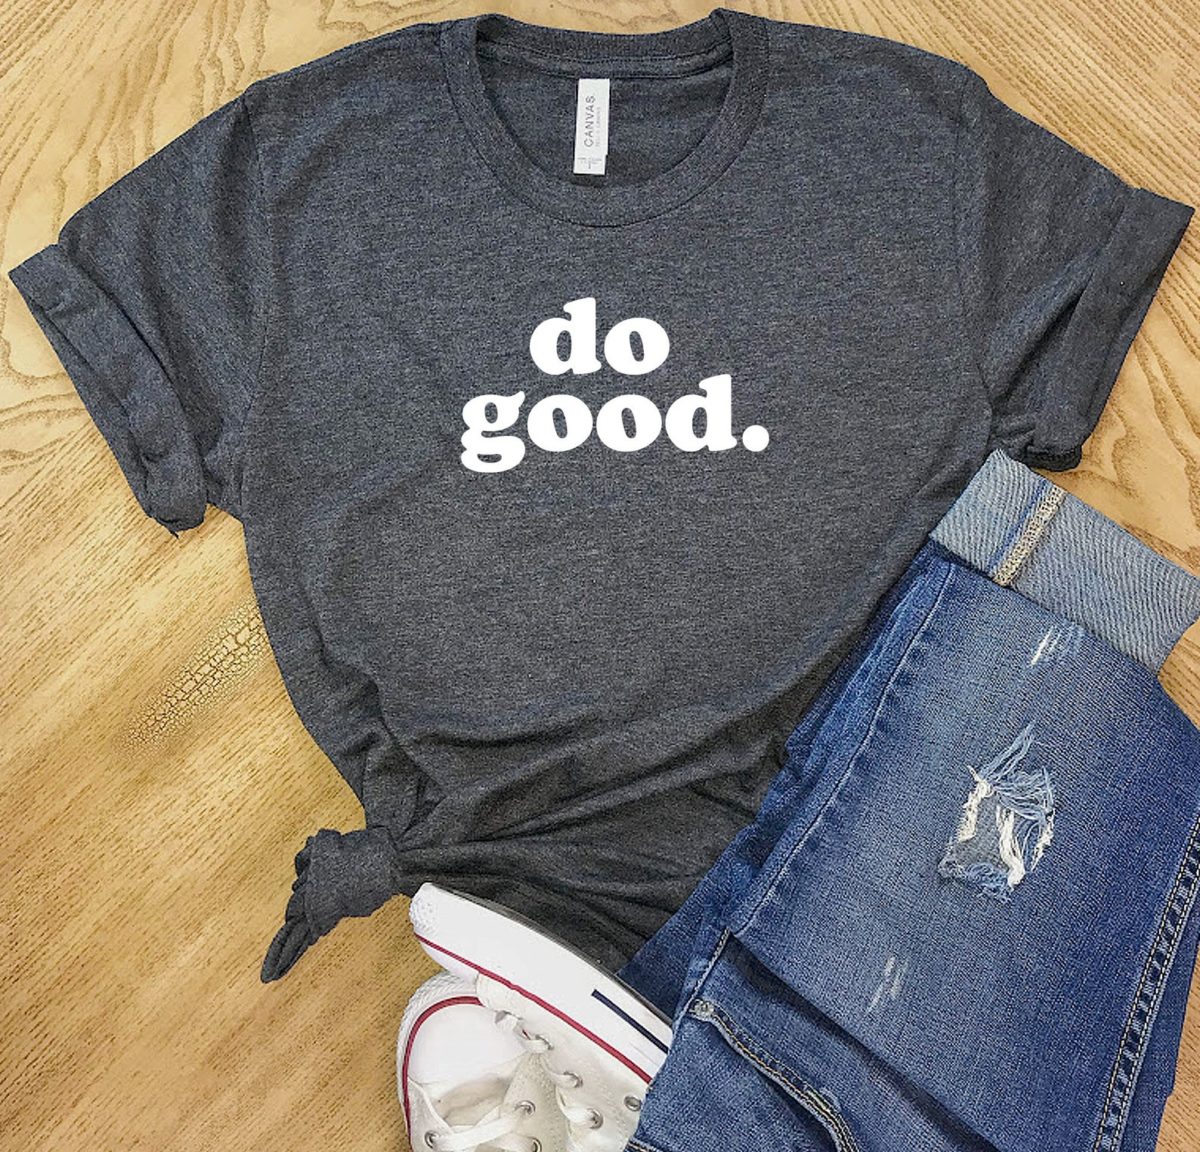 26 Awesome Etsy T-Shirts That Send a Positive Message and Make Great Gifts